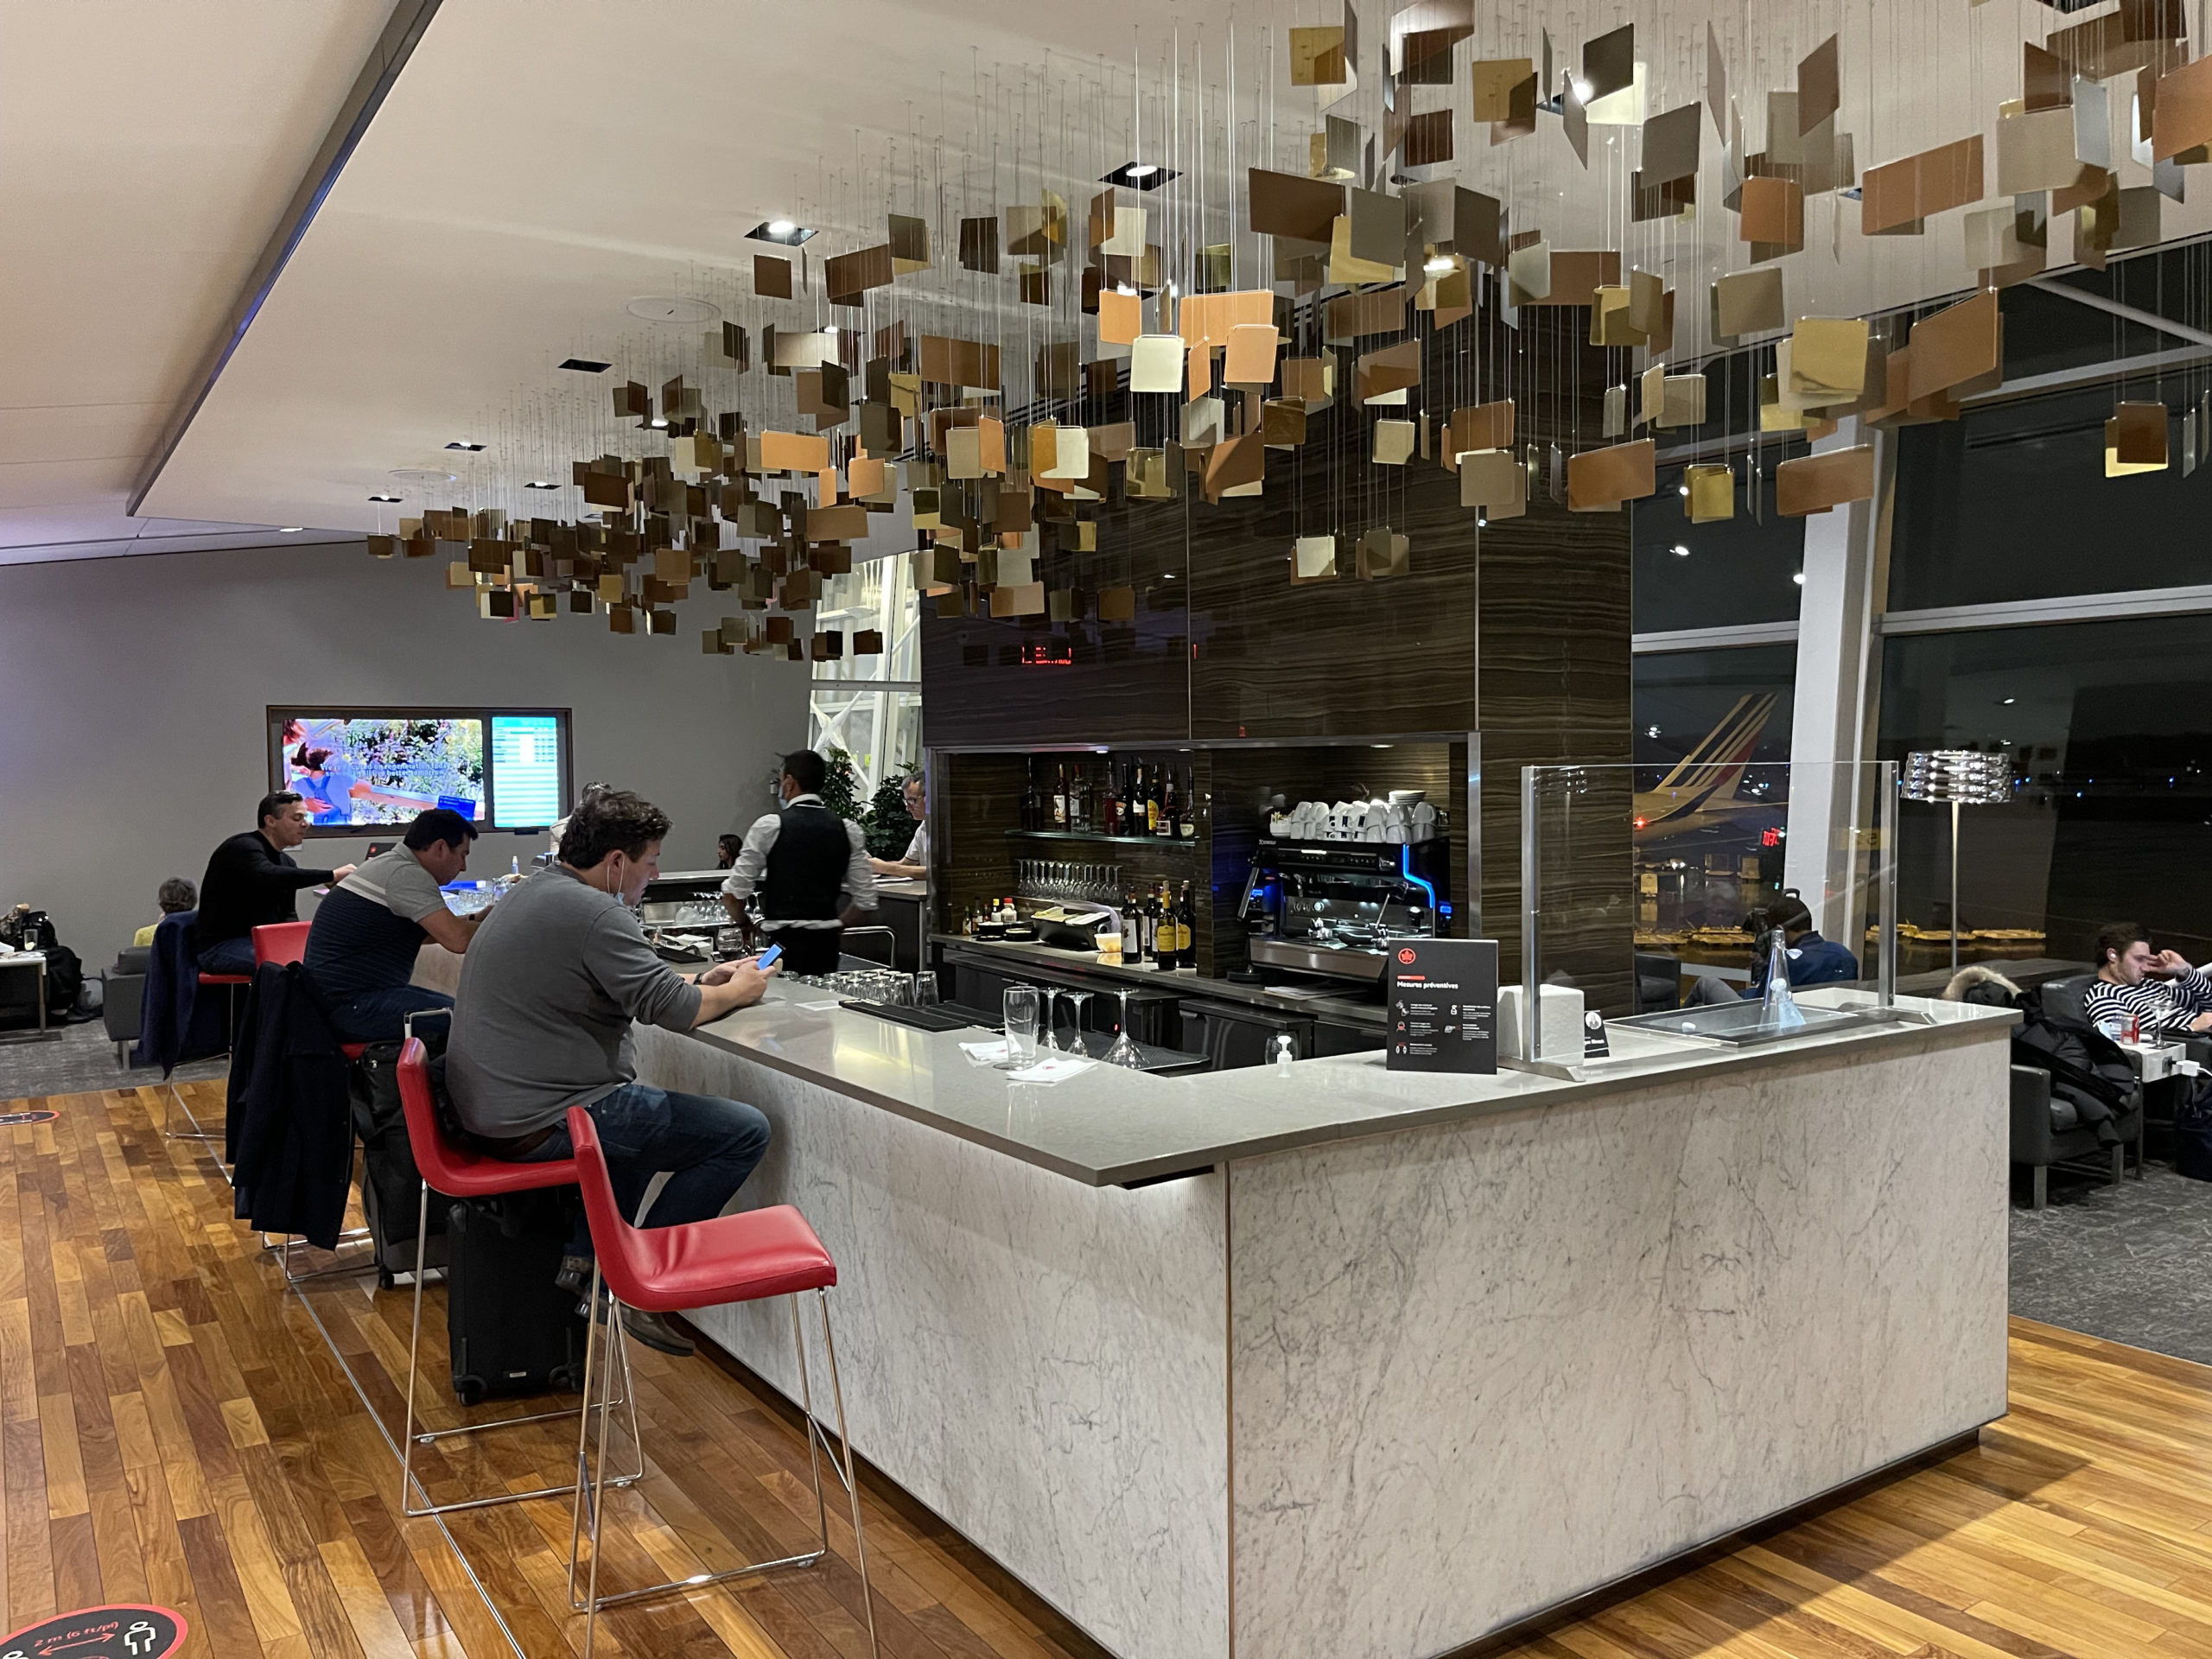 Air Canada Maple Leaf Lounge Montreal